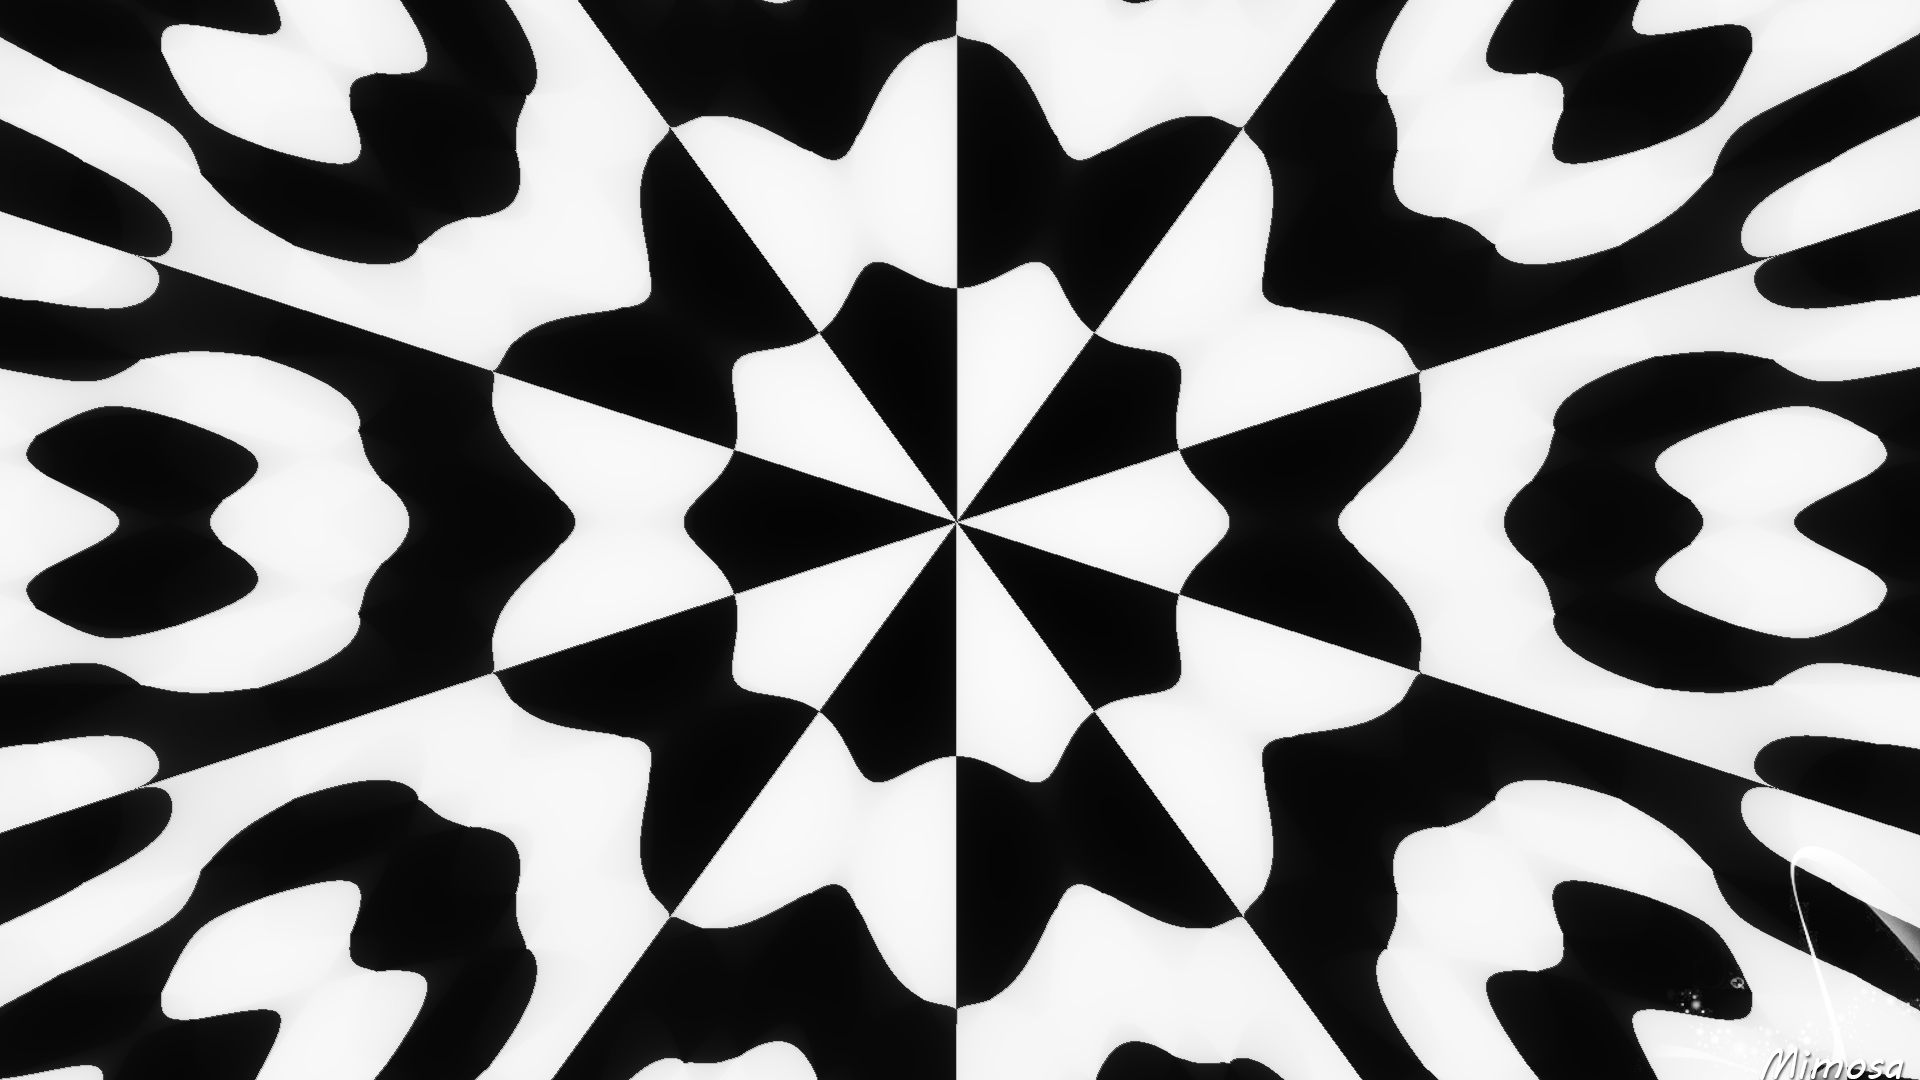 Abstract Artistic Black Amp White Digital Art Pattern Shapes 1920x1080